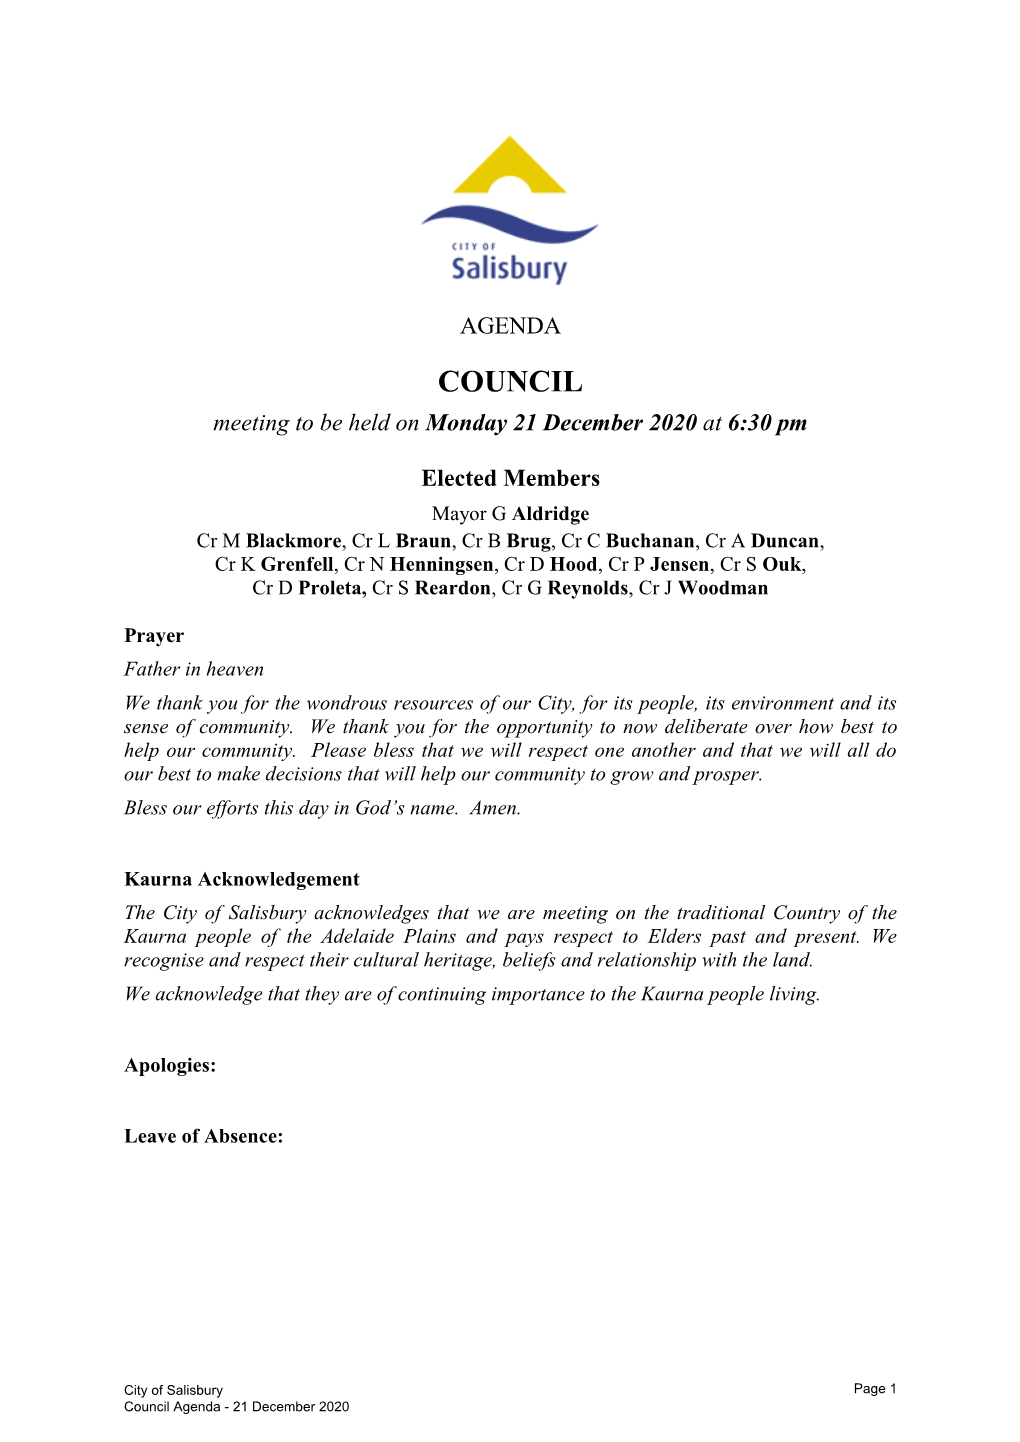 COUNCIL Meeting to Be Held on Monday 21 December 2020 at 6:30 Pm